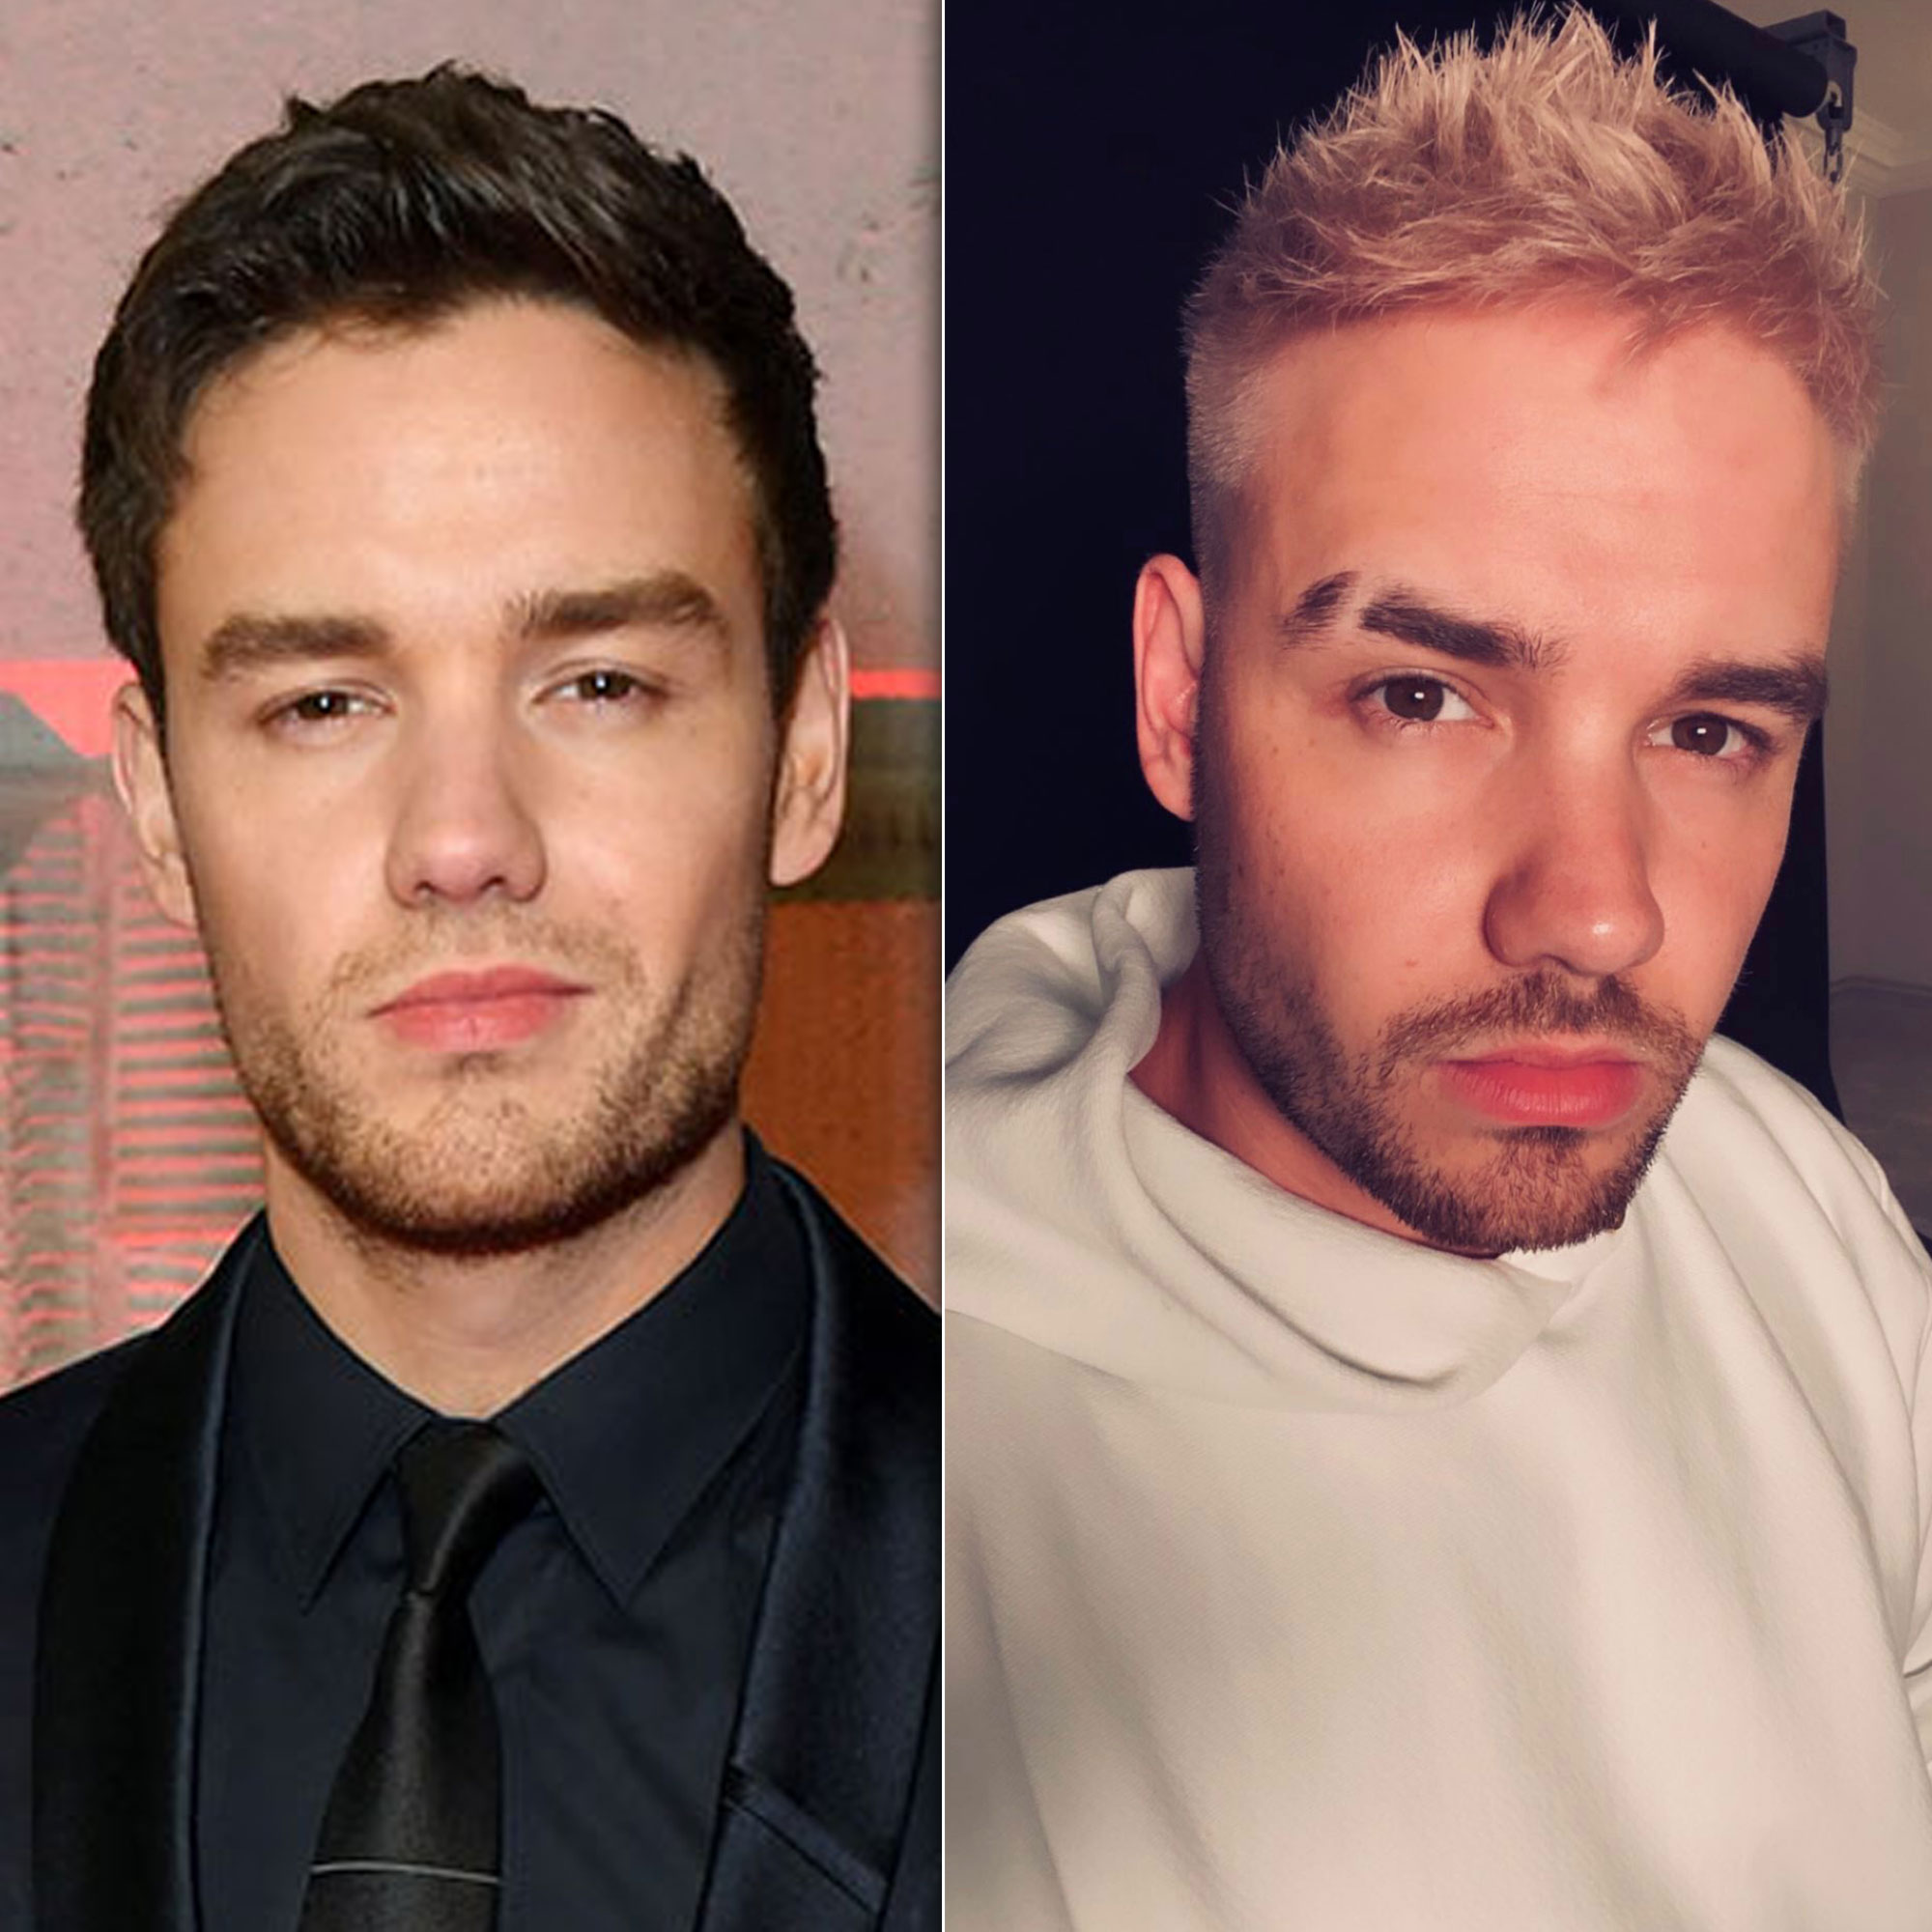 HARRY STYLES ON SHAVING HIS HEAD & LIAM PAYNE ON HIS NEW CURLS! | We've  moved! Check out our new website!